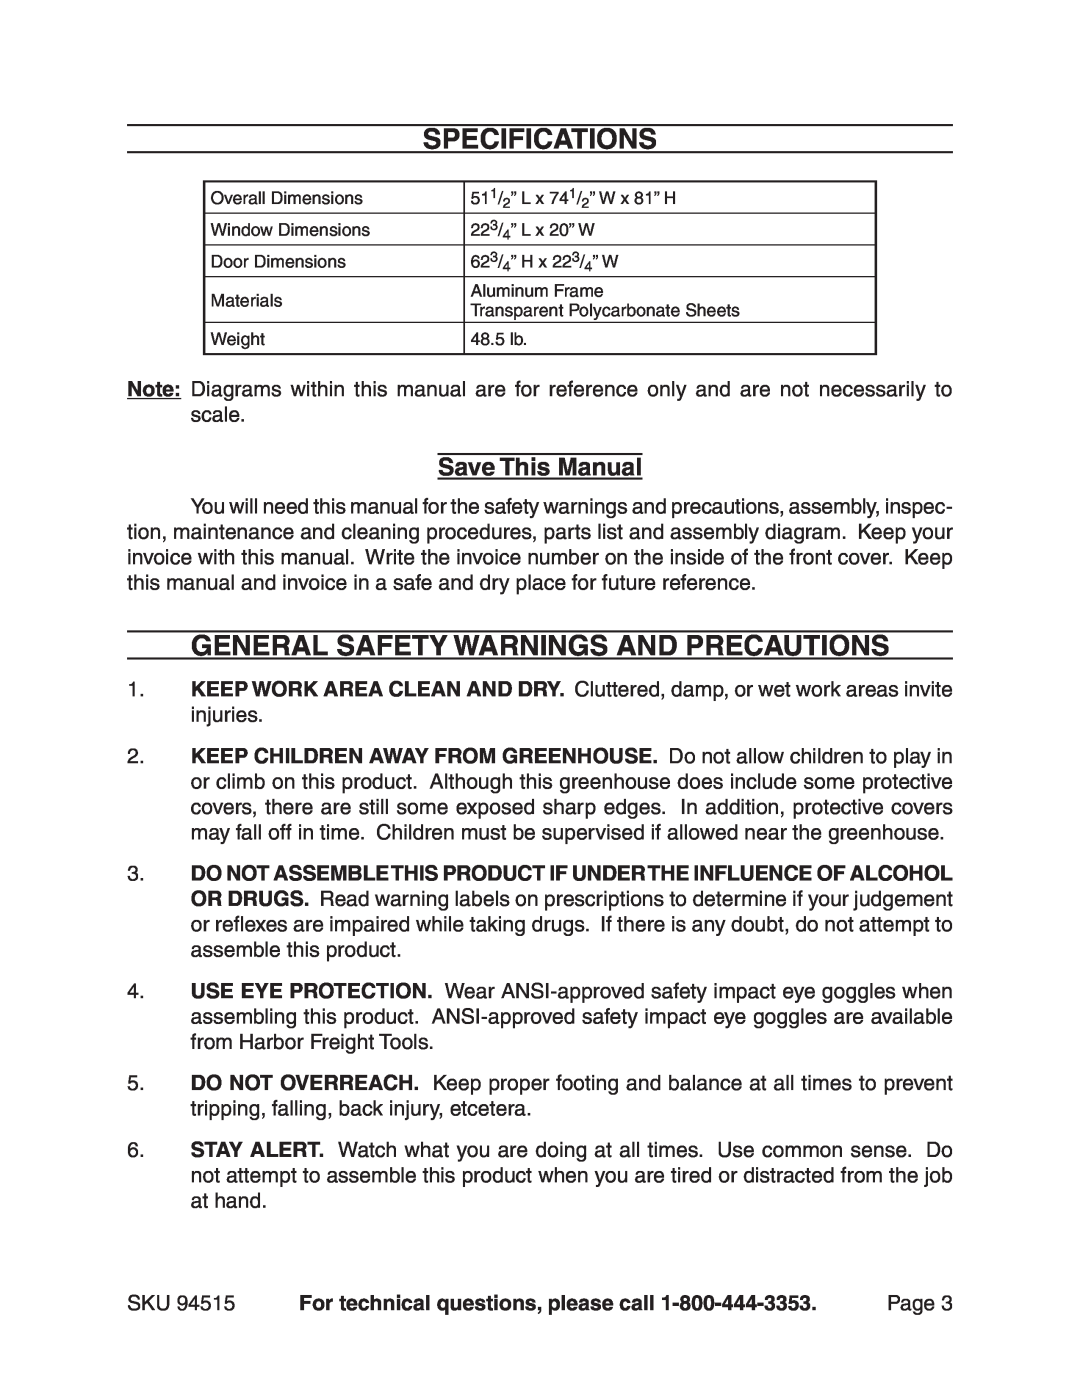 Harbor Freight Tools 94515 manual Specifications, Save This Manual, General Safety Warnings And Precautions 